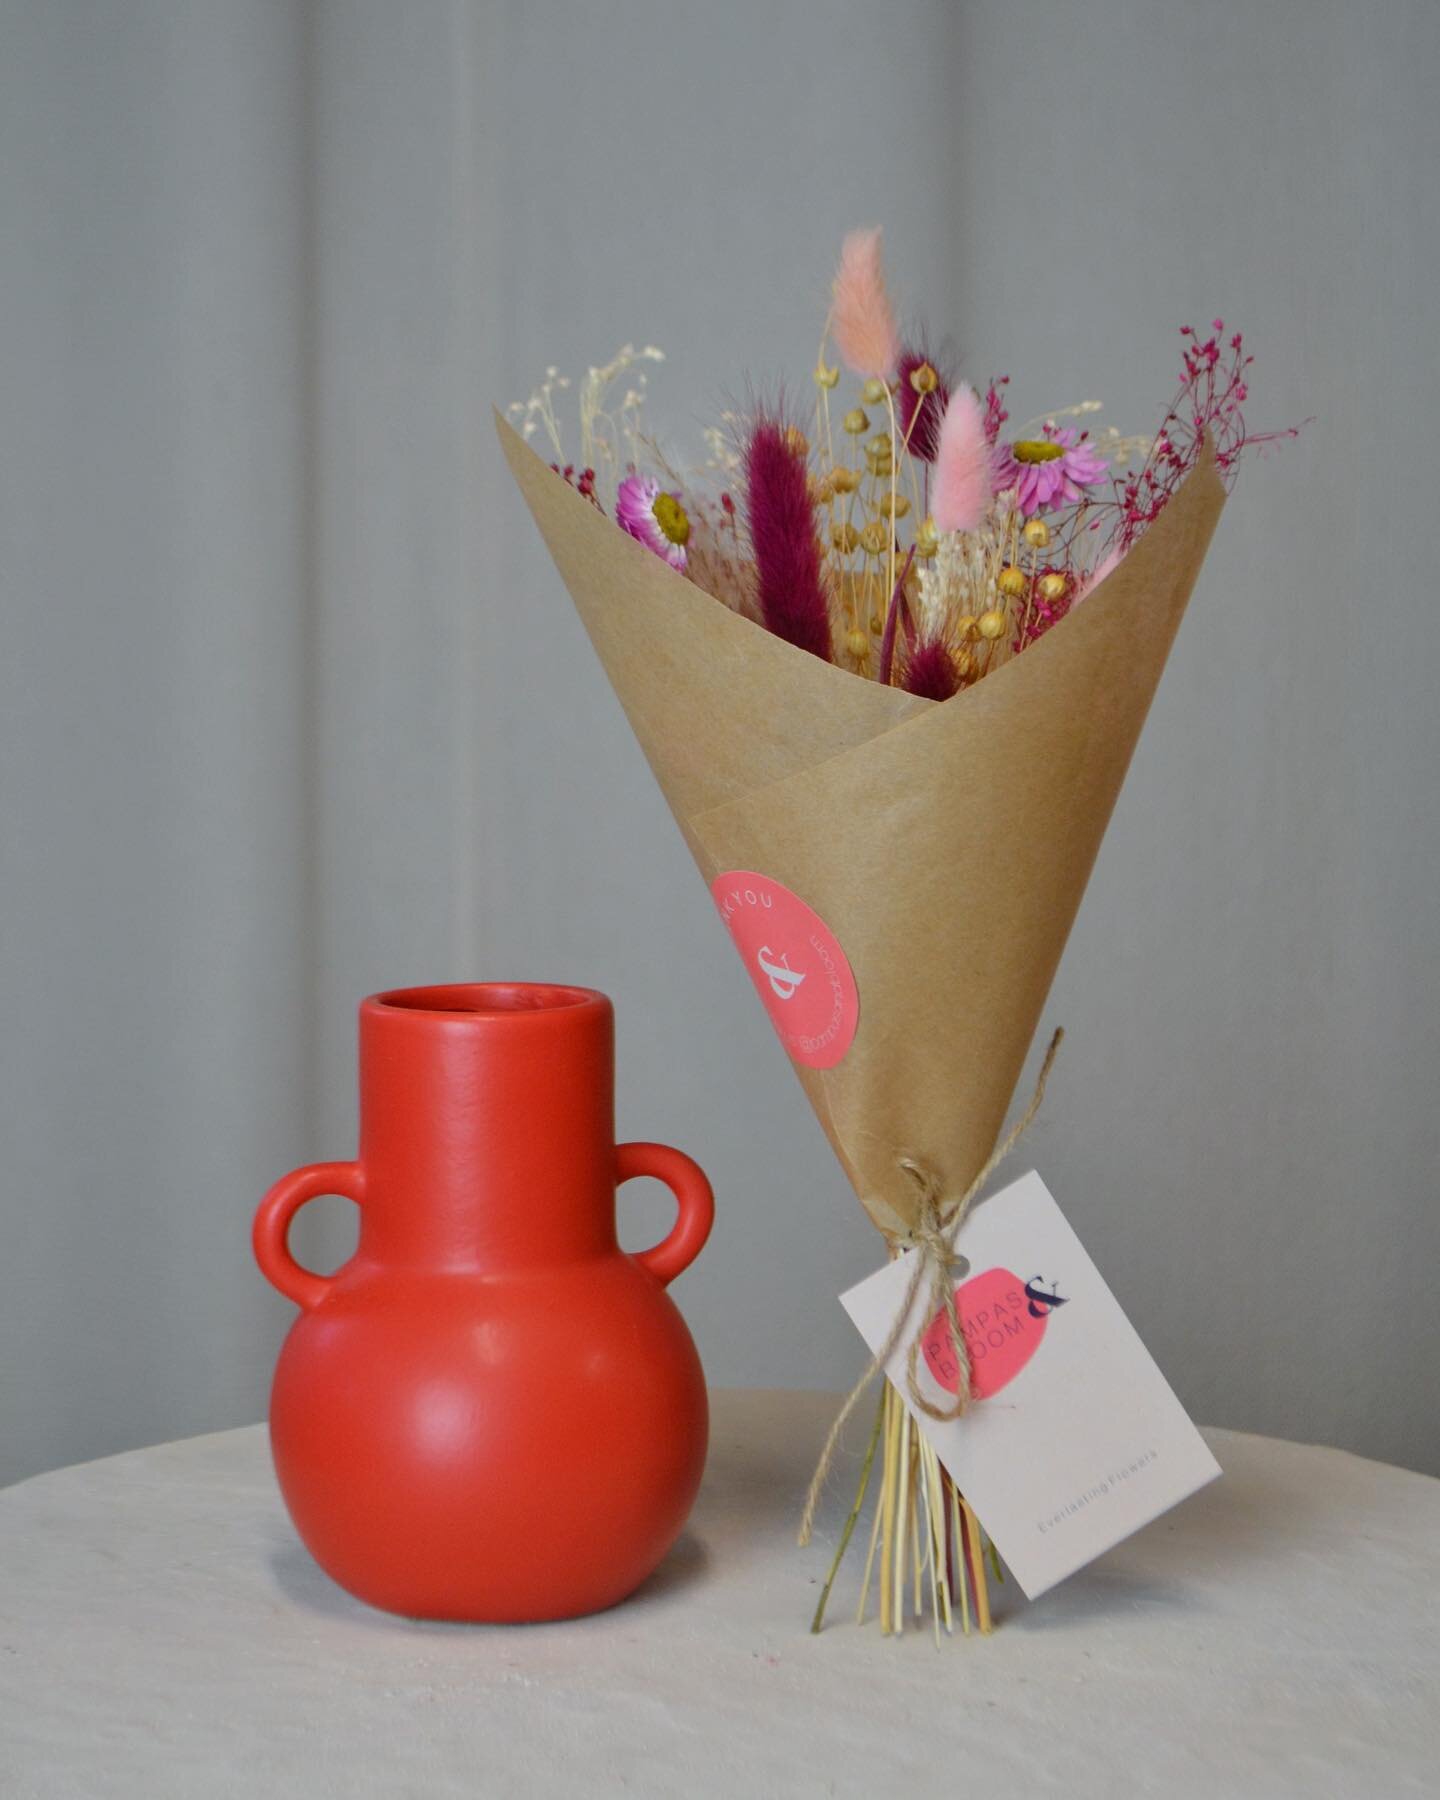 Meet our 𝘓𝘰𝘷𝘦 + 𝘏𝘶𝘨𝘴 Bunch &amp; Vase Giftset! A mixed bunch of gold, cream, pink &amp; red dried flower stems in a ceramic amphora vase 💌 UK wide postage available online now 💘❣️